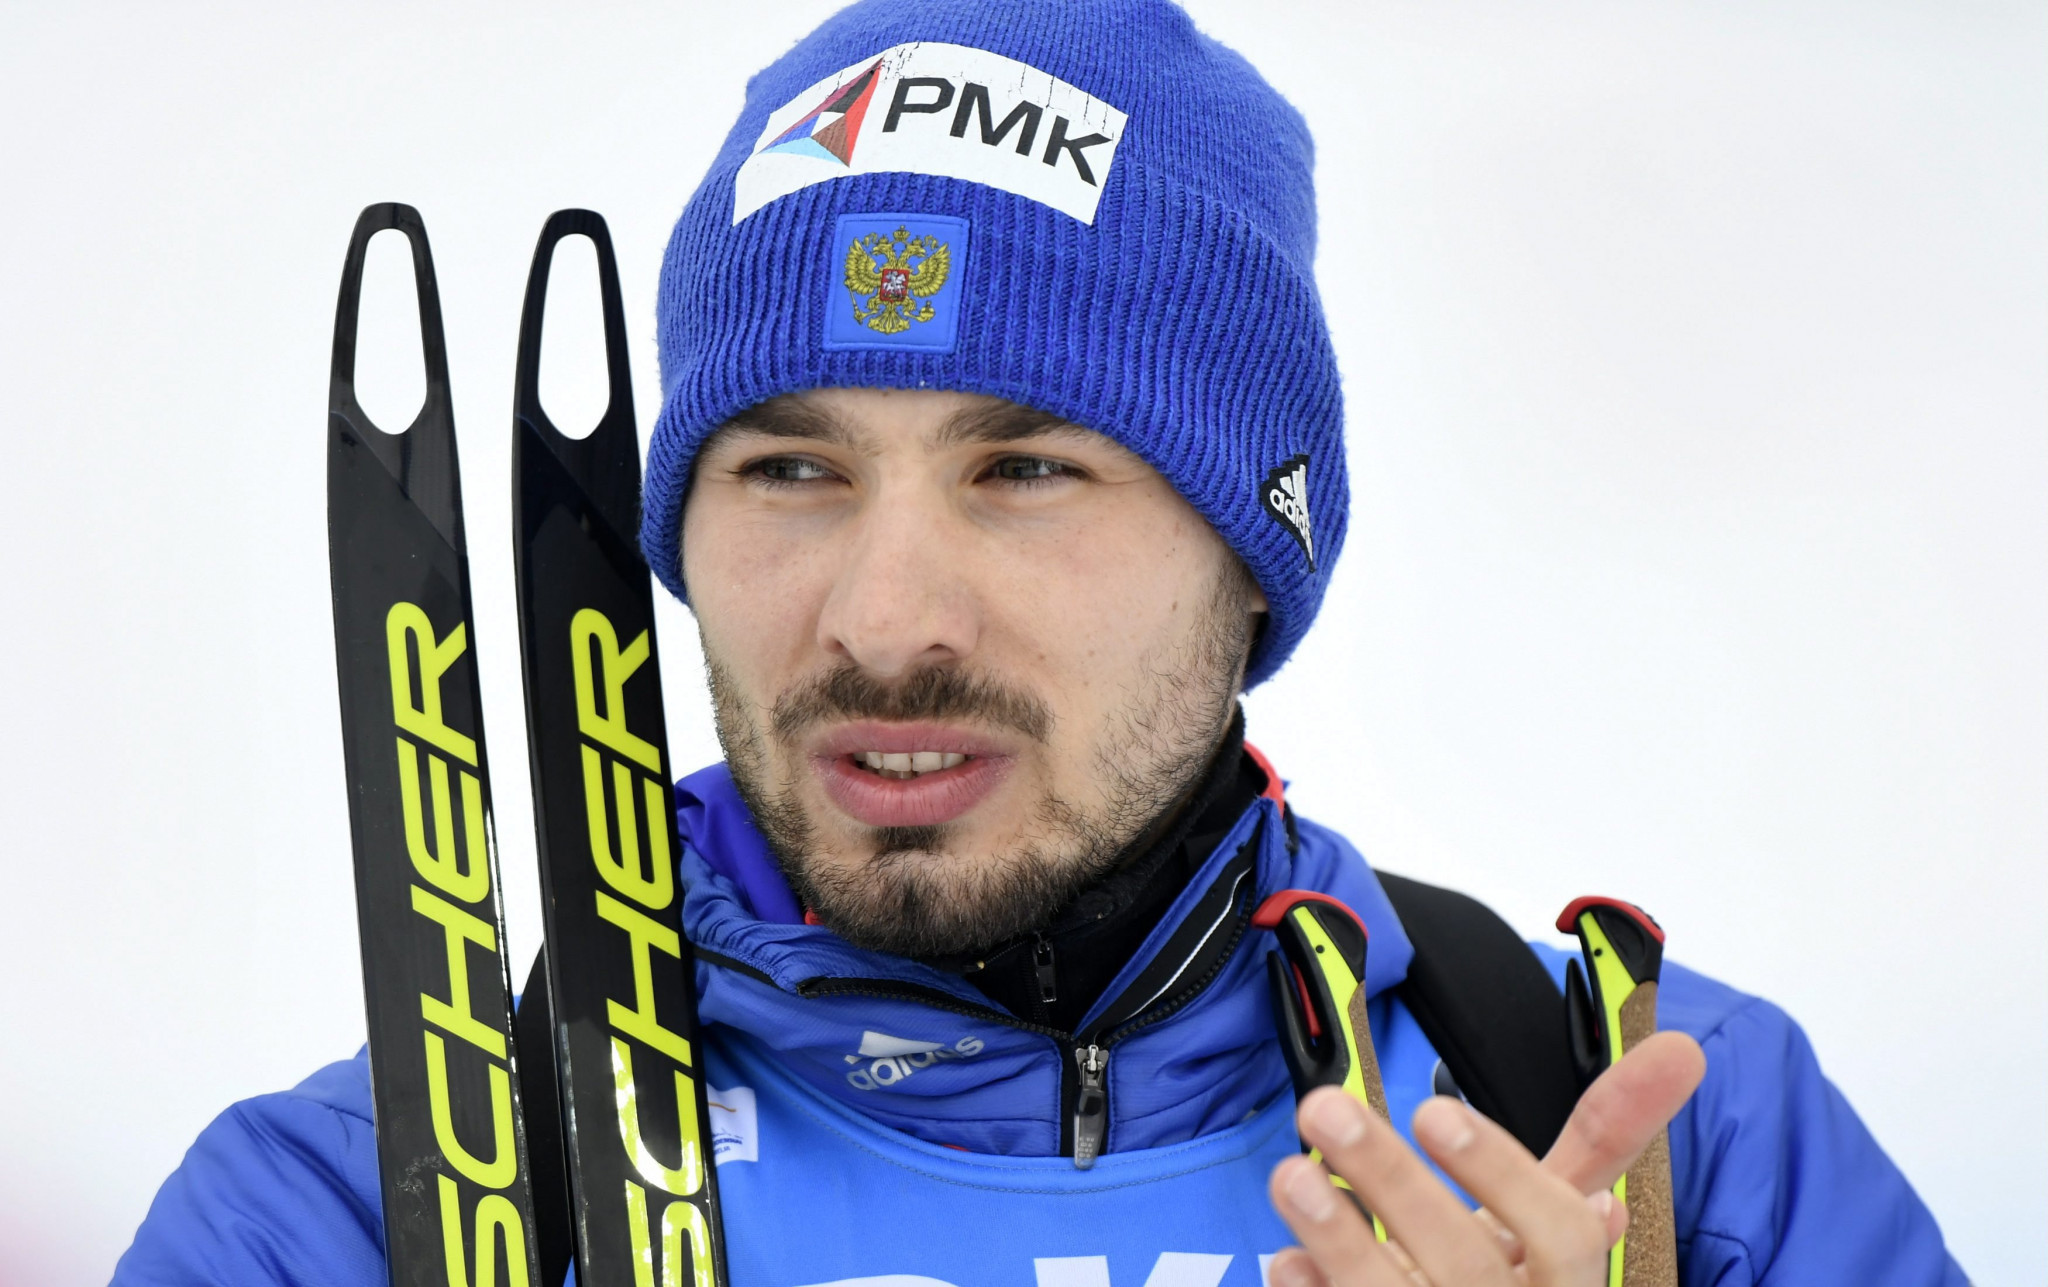 Russian biathlete Shipulin to retire after Pyeongchang 2018 drugs ban and Austrian police investigation